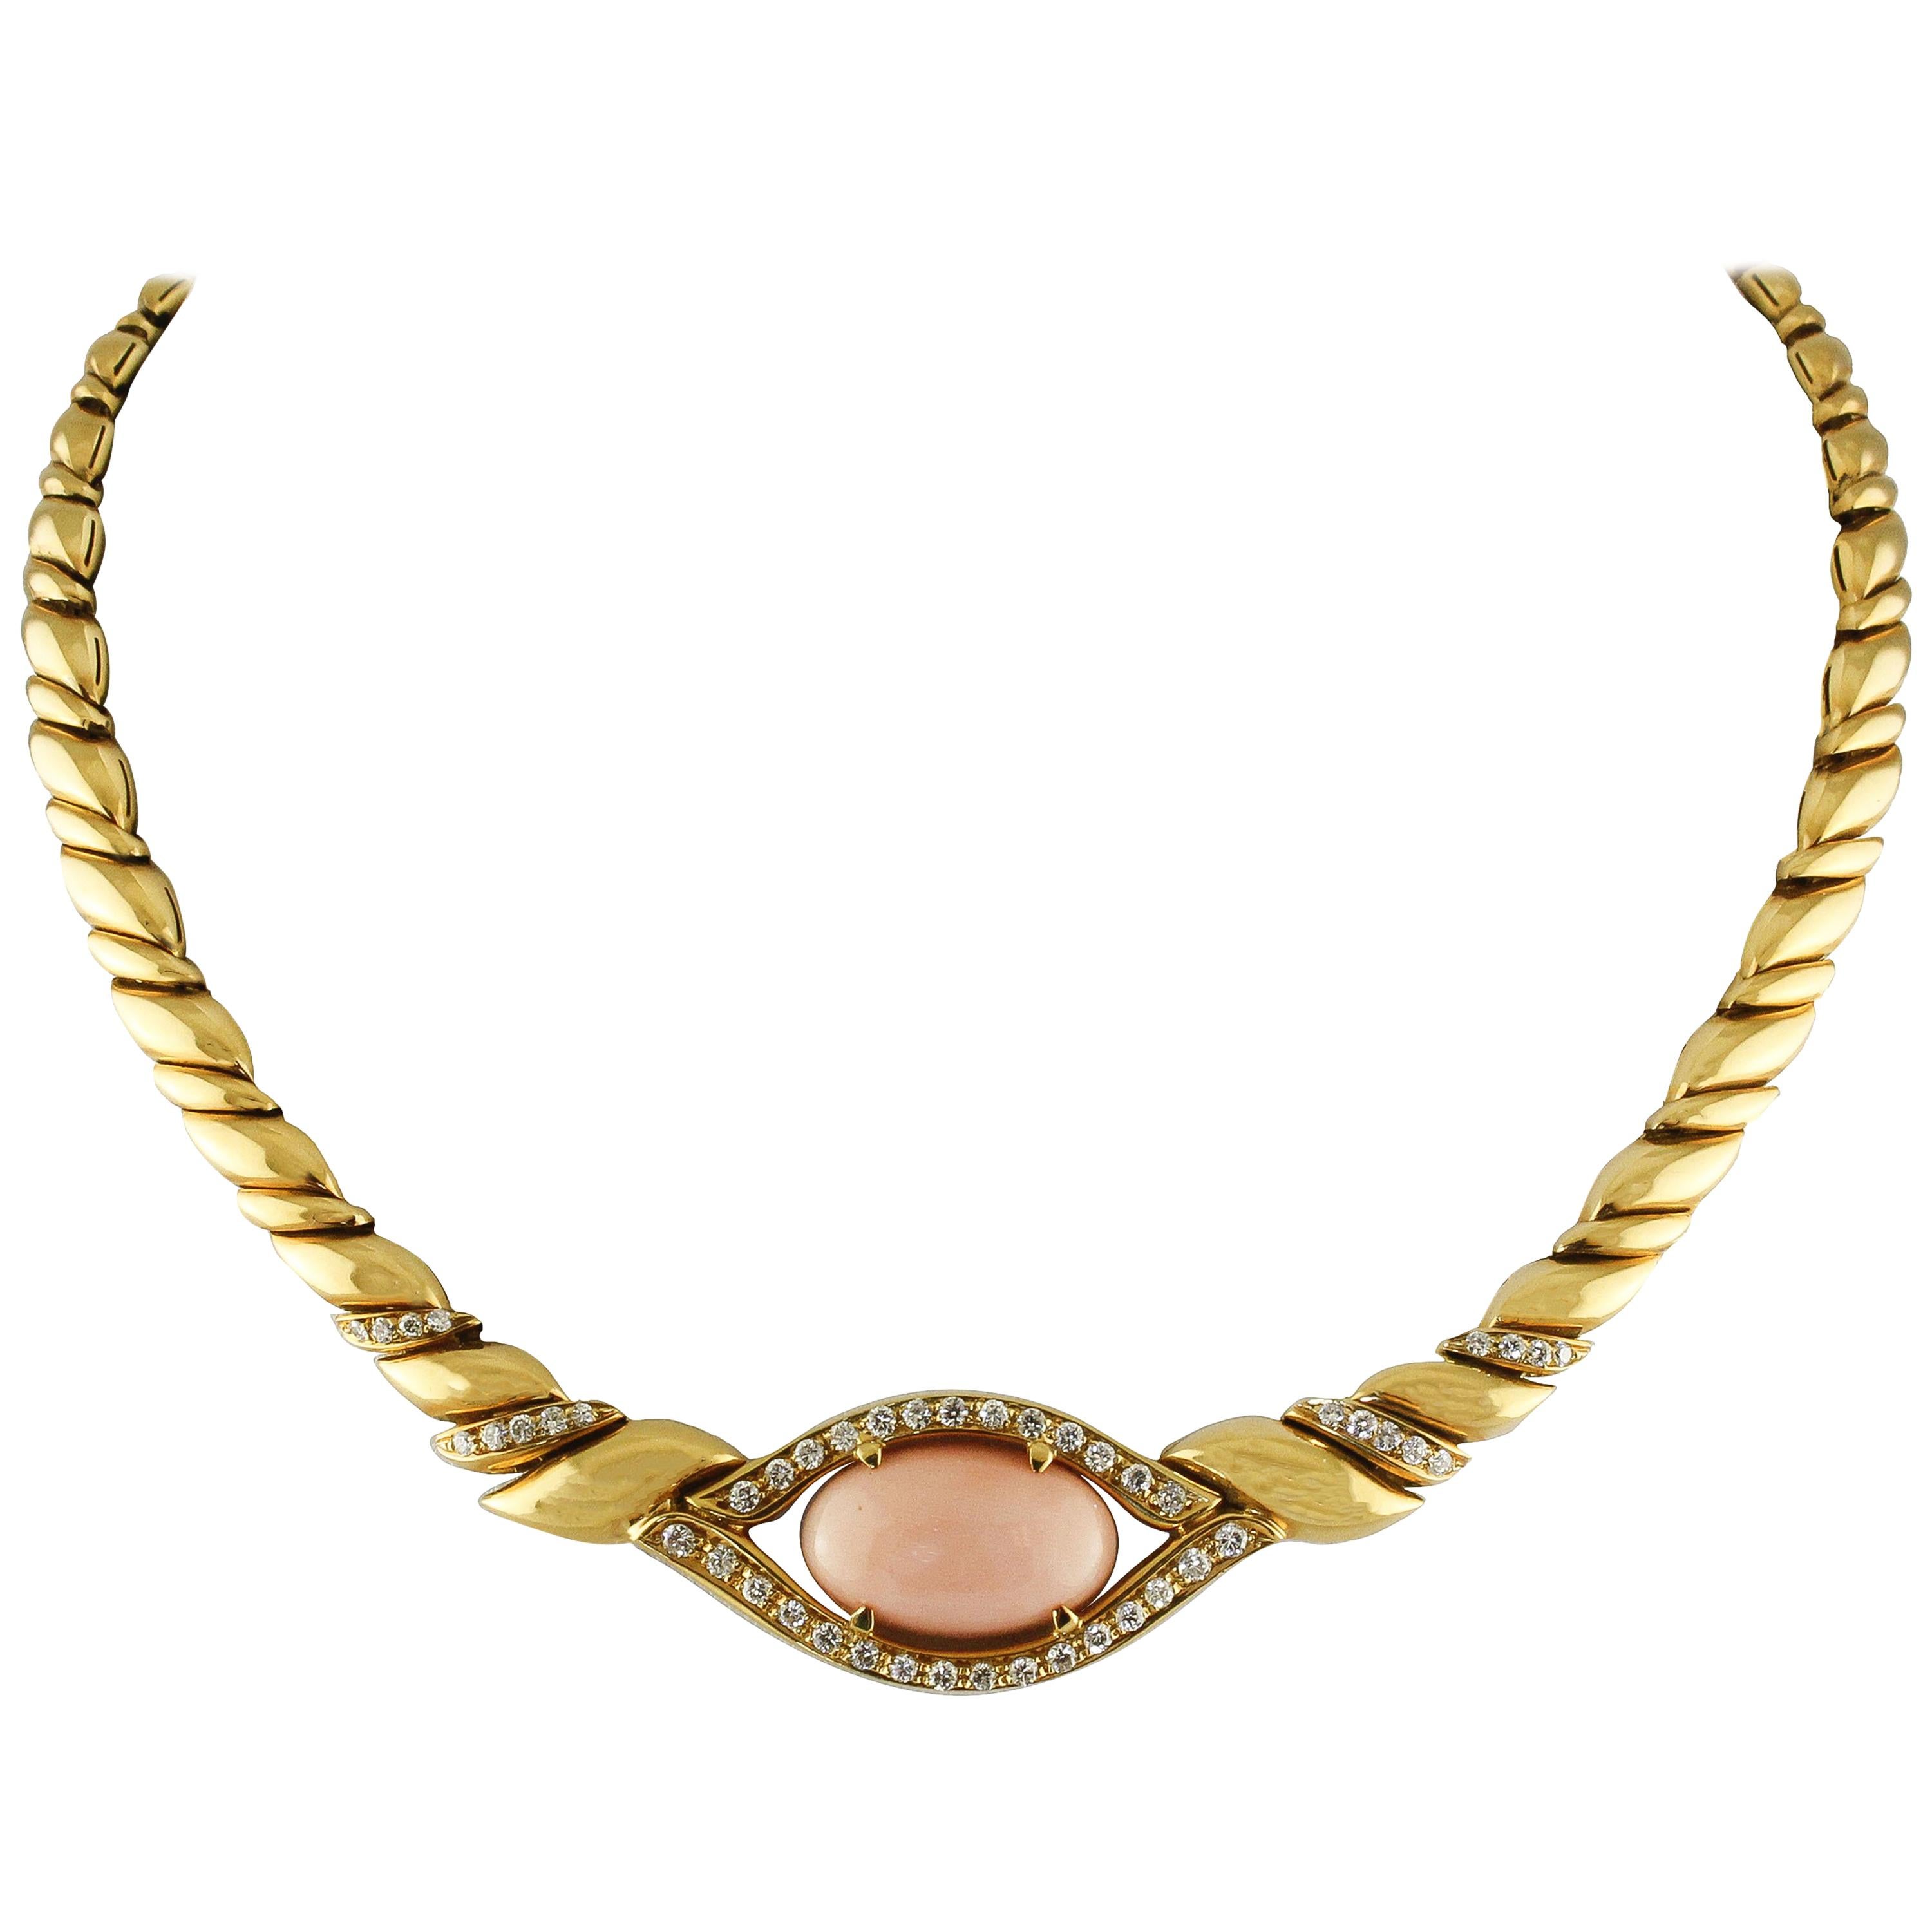 White Diamonds, Pink Oval Shape Coral, 18K Yellow Gold Chain Necklace